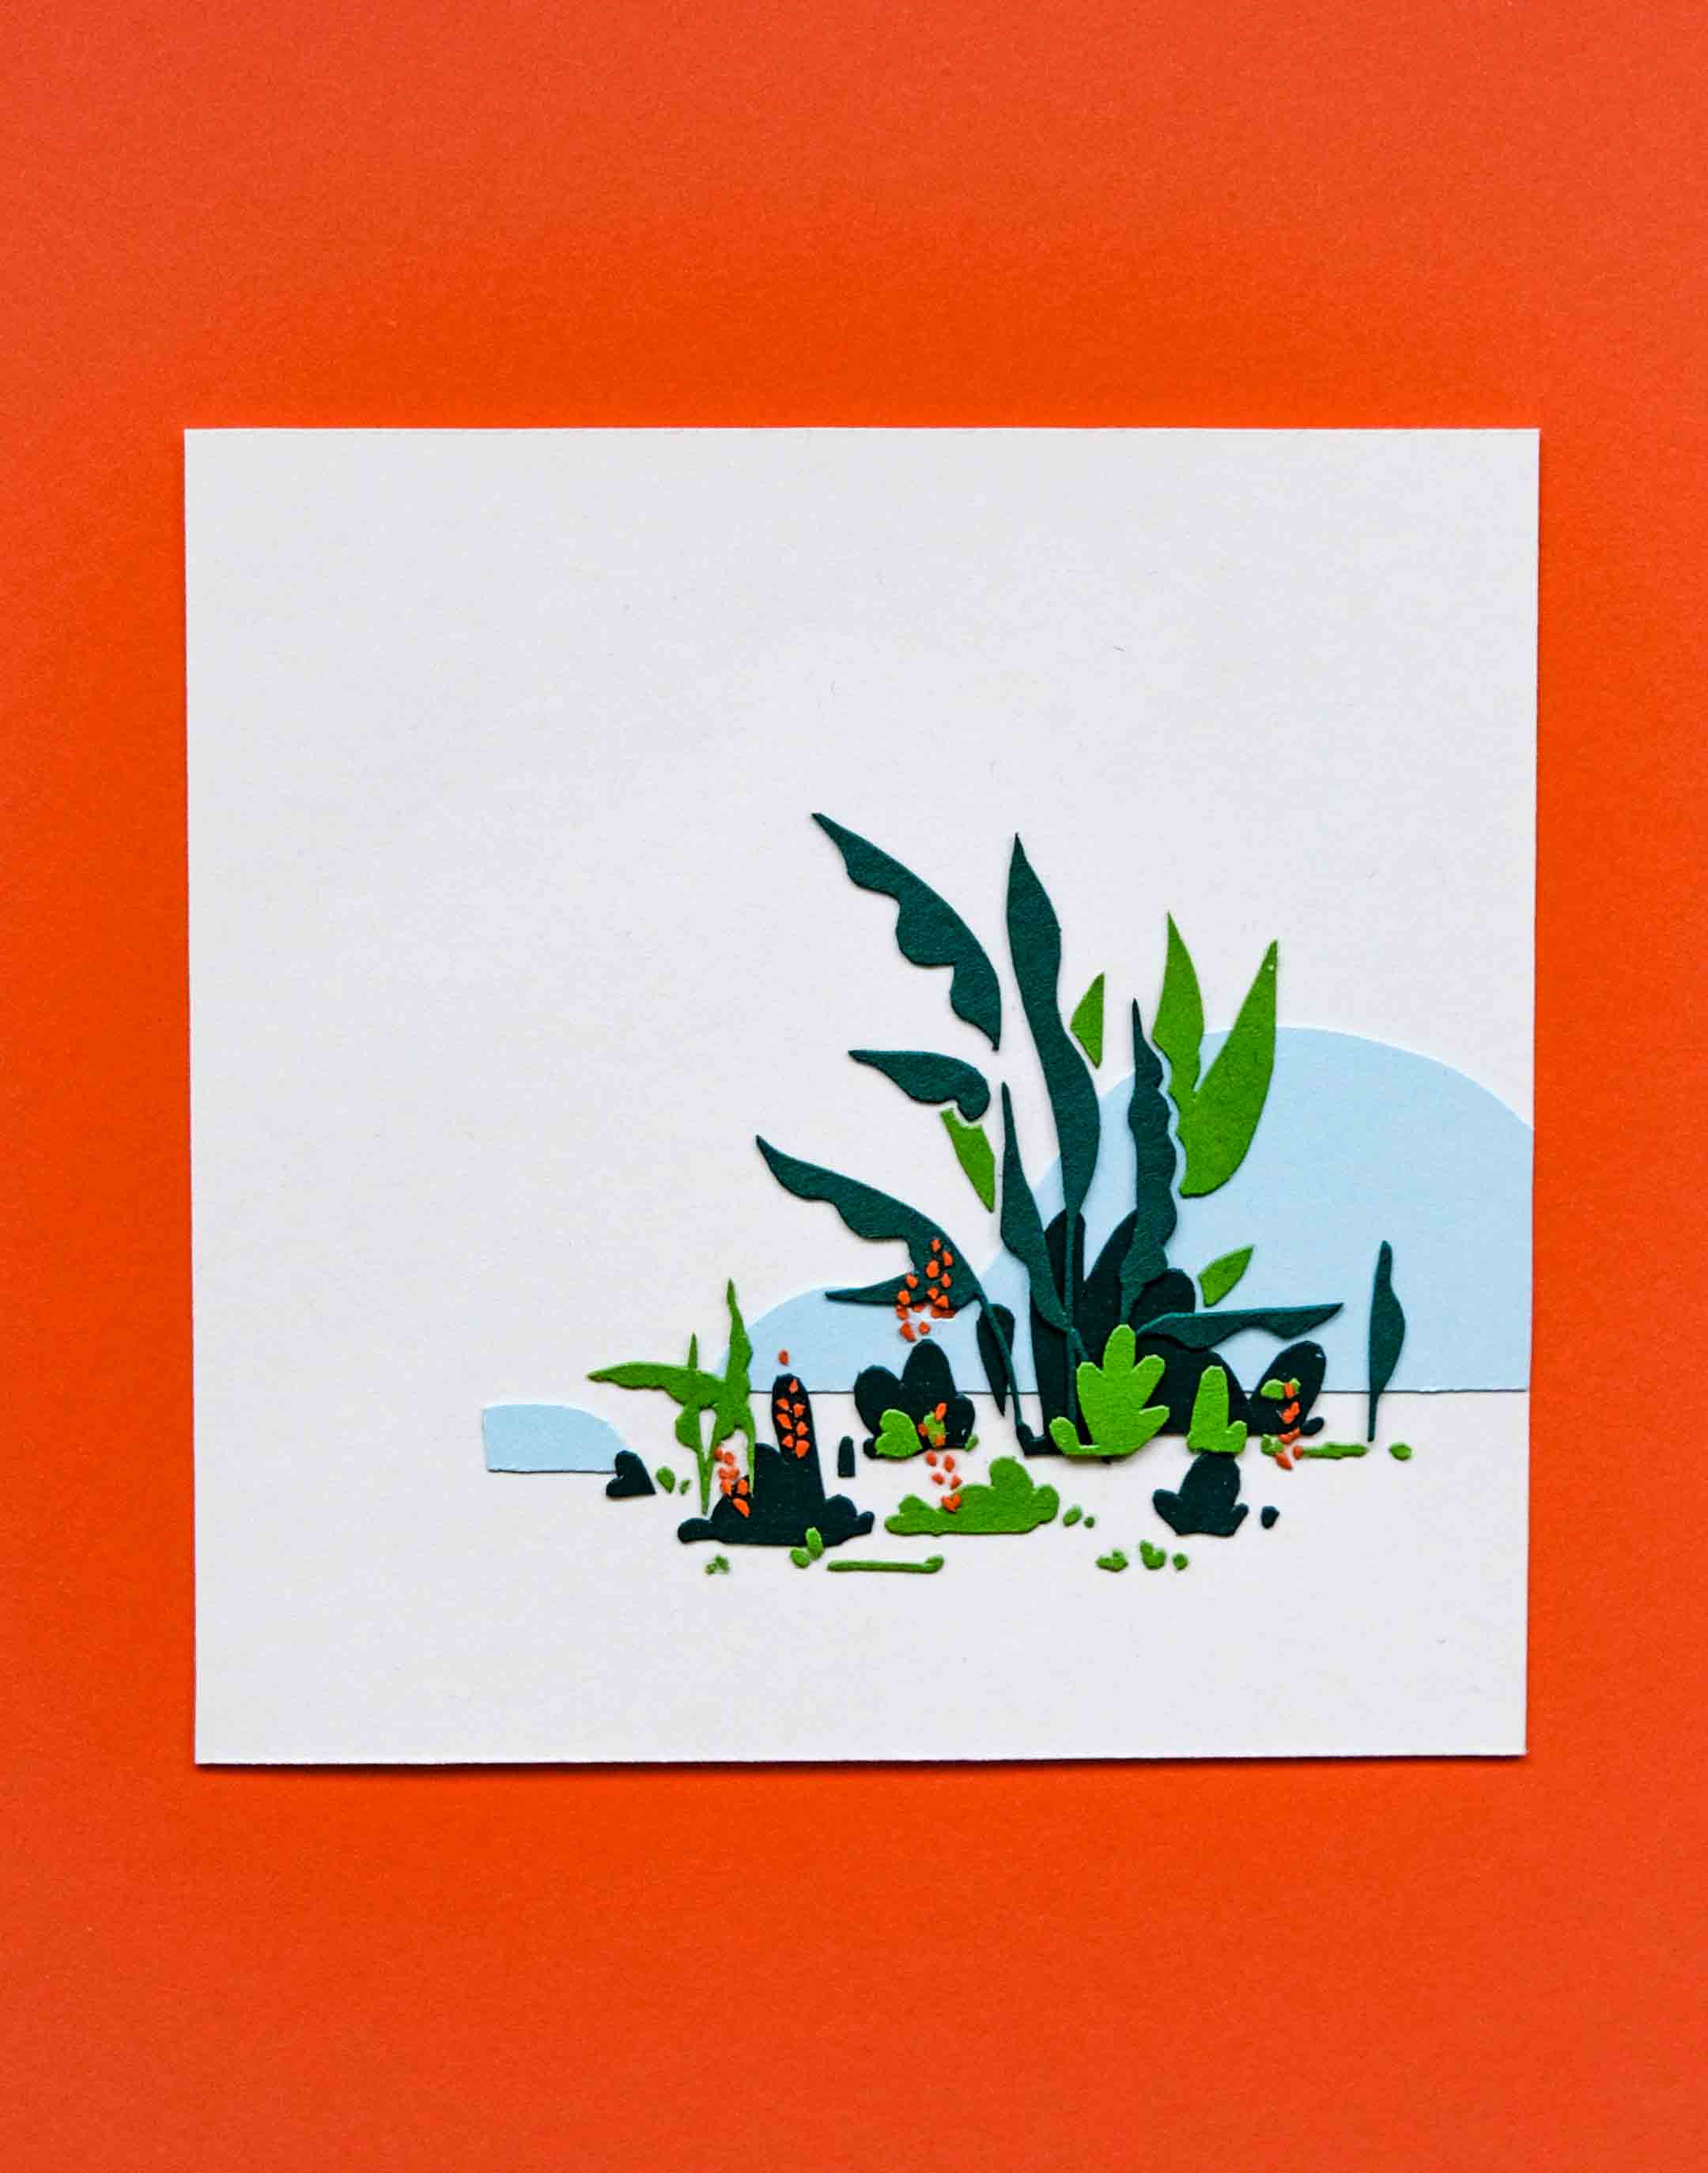 A small square artwork depicts tropical green plants in front of blue hills. The artwork is on an orange backdrop.